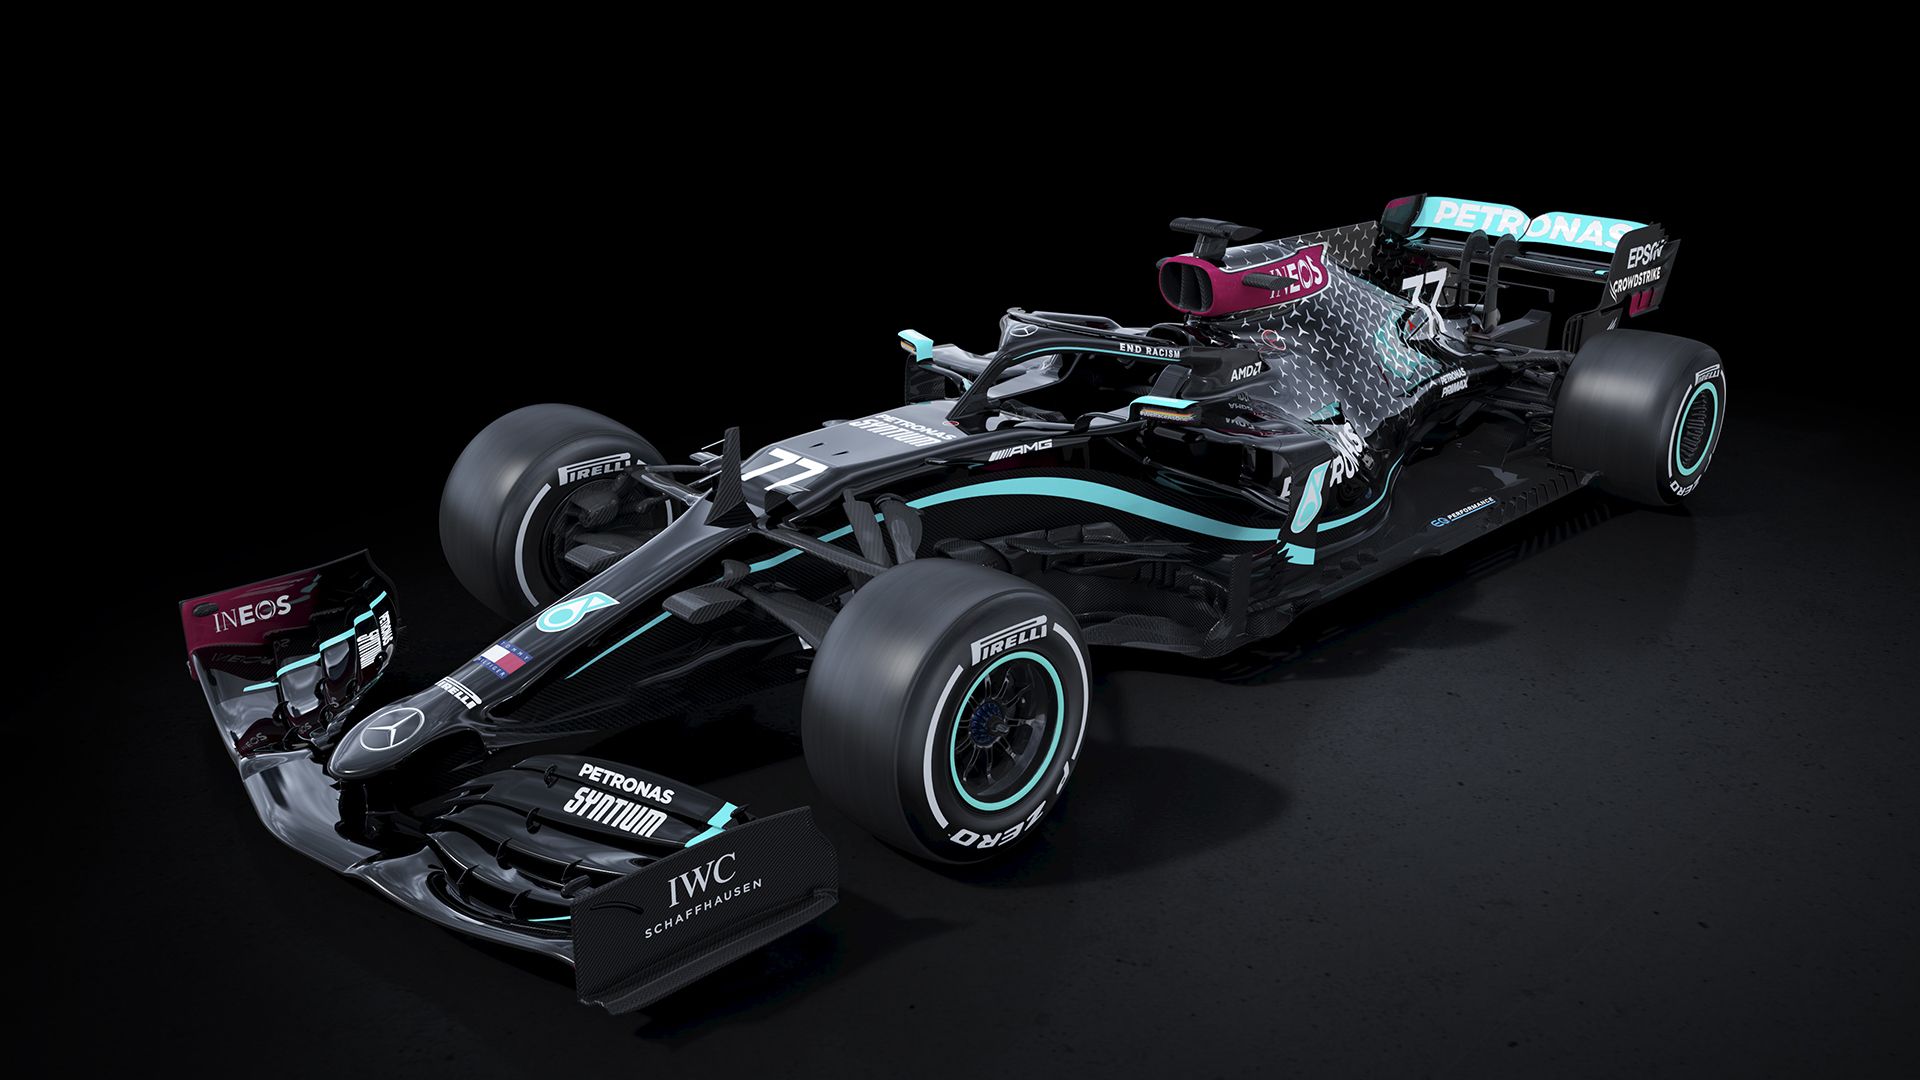 Mercedes Switch To All Black Livery For 2020 In Stand Against Racism And Commitment To Diversity. Formula 1®